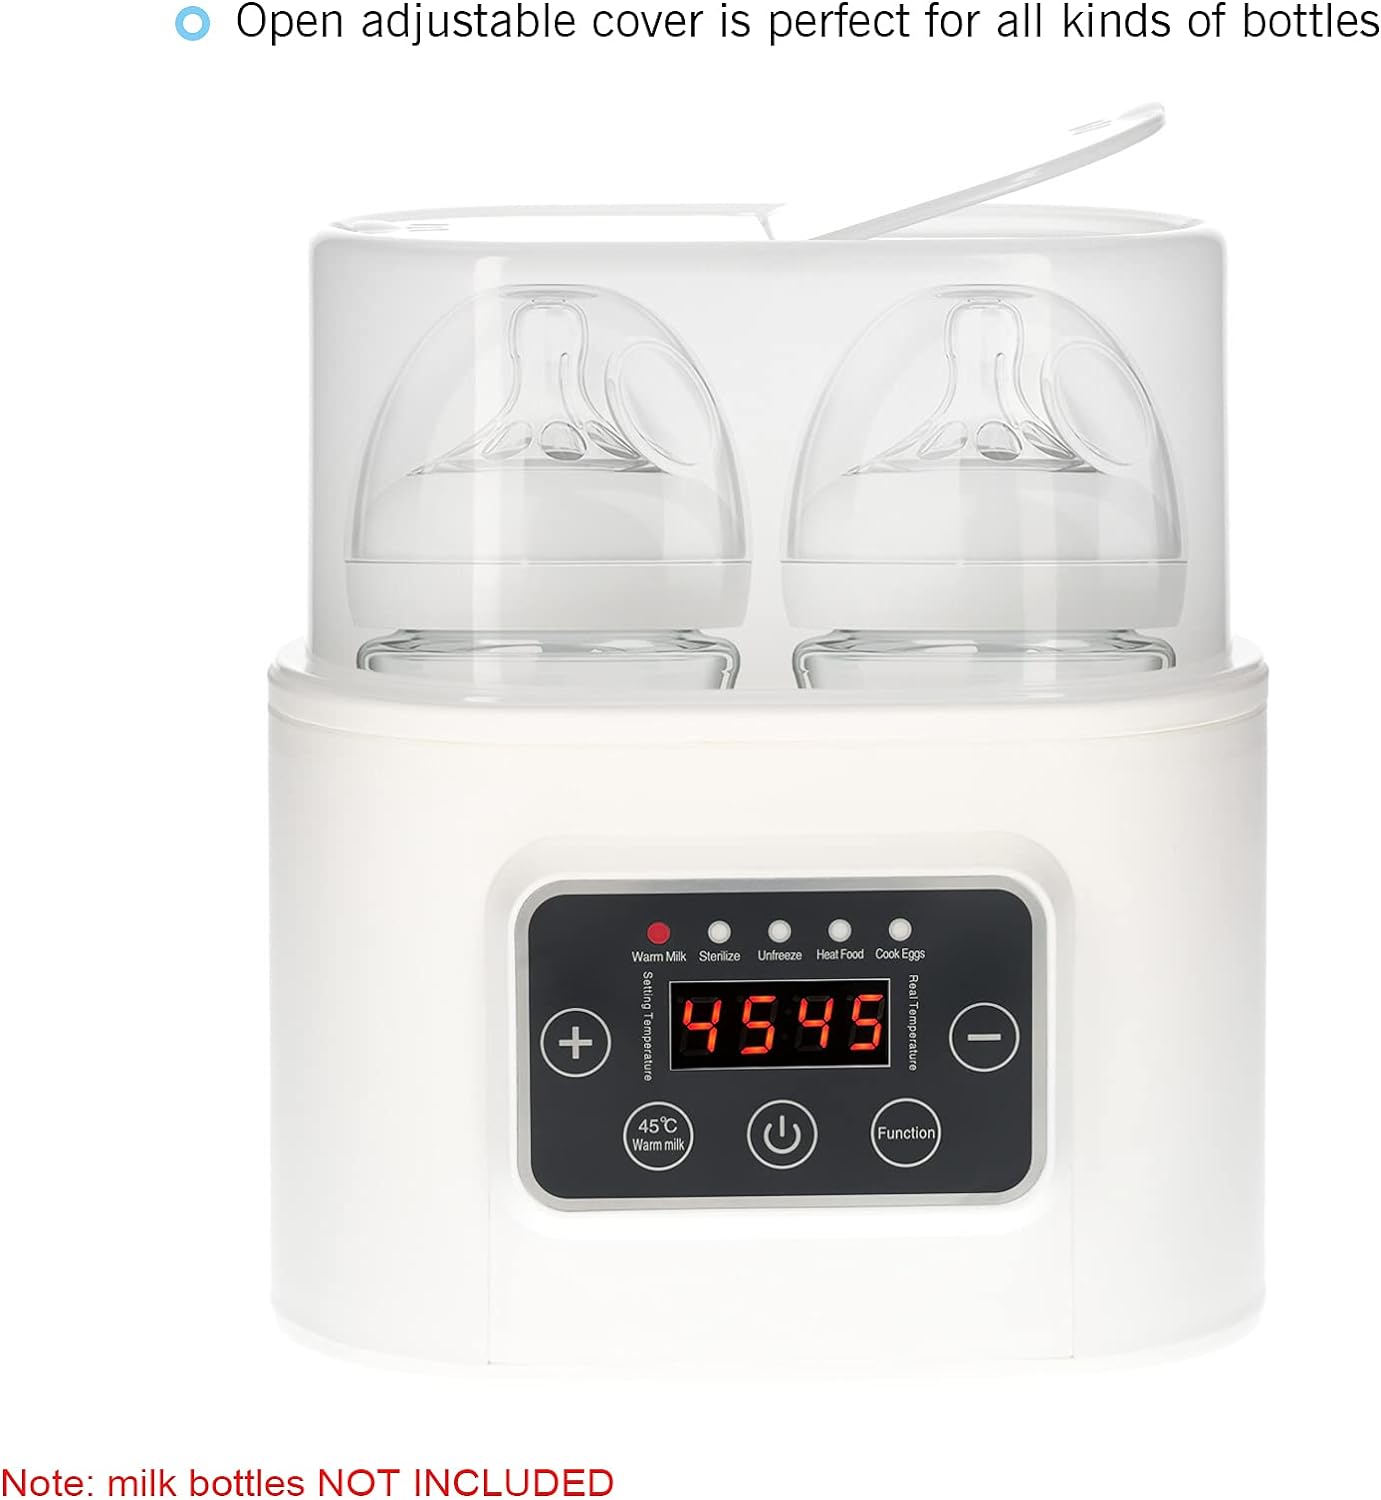 Morelian Baby Bottle Warmer 5-in-1 Digital Baby Food Heater with Timer Digital Display Double Bottle Steam Sterilizer Defrosting Portable Warmer for Breastmilk and Formula